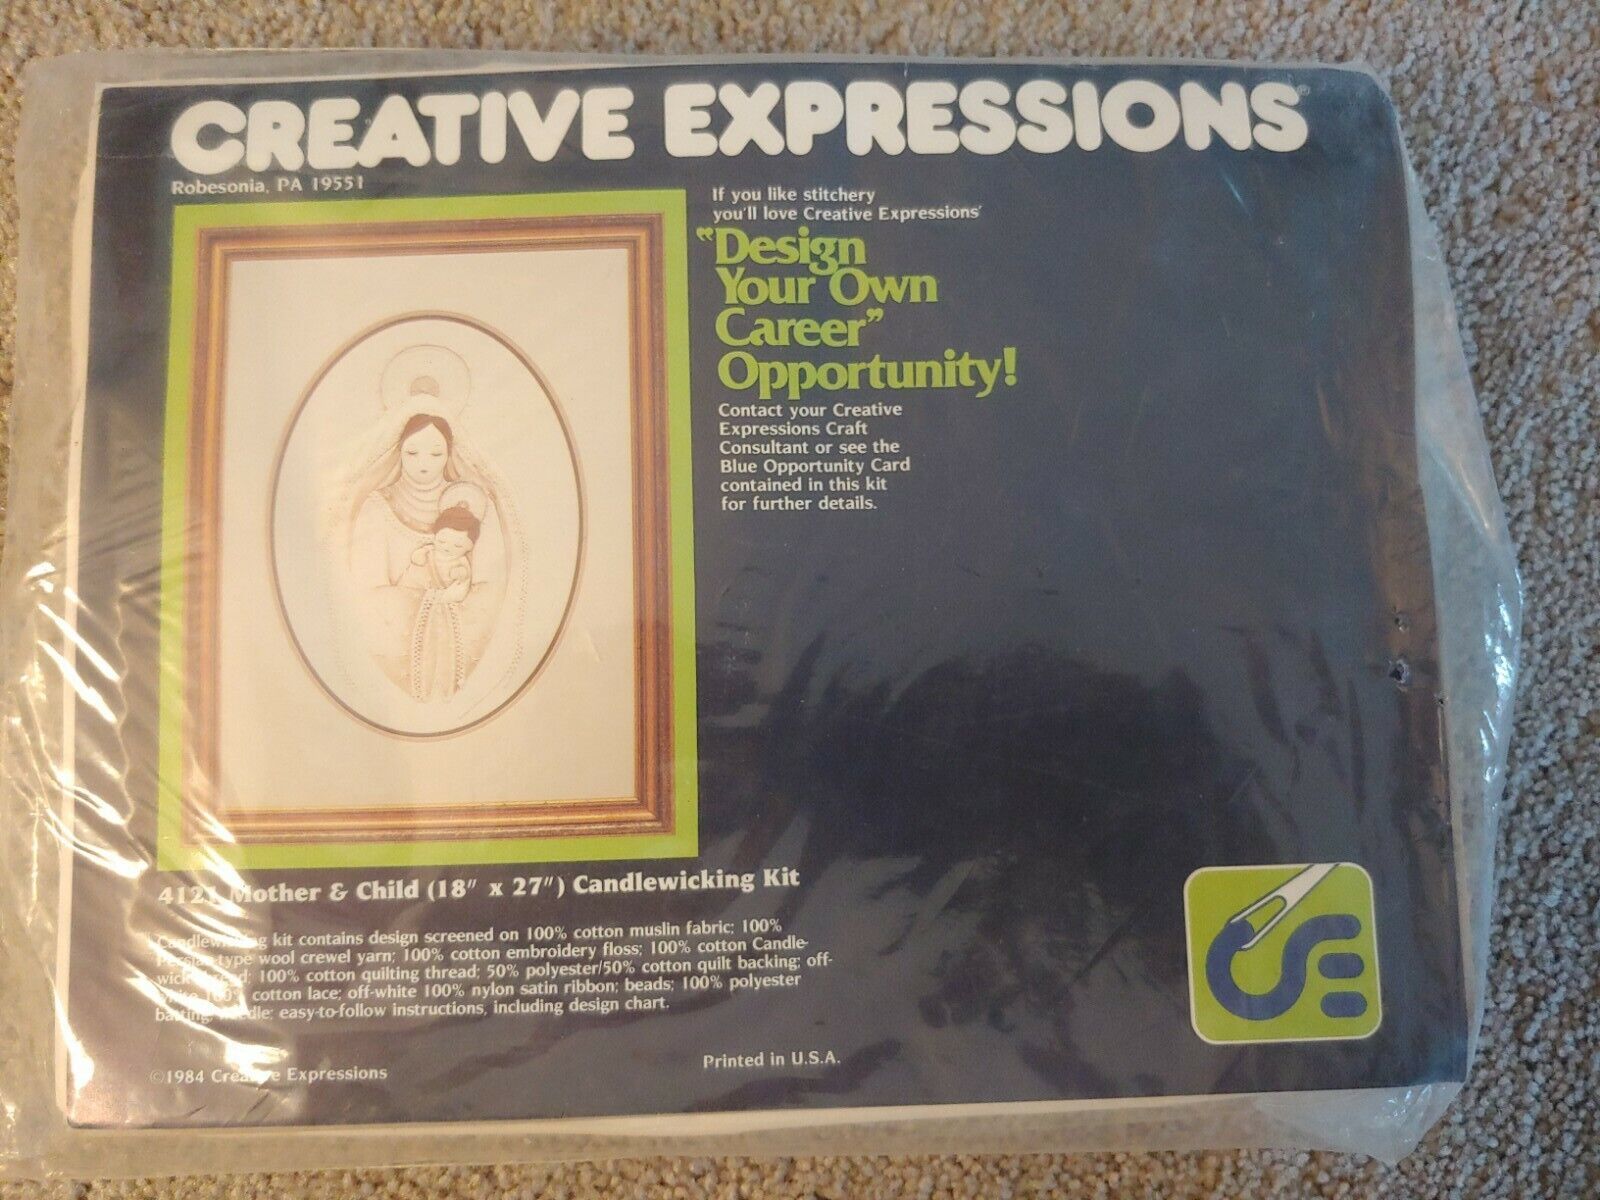 1984 Creative Expressions Mother & Child Candlewicking Kit  4121 18 x 27 Vintage - $21.01